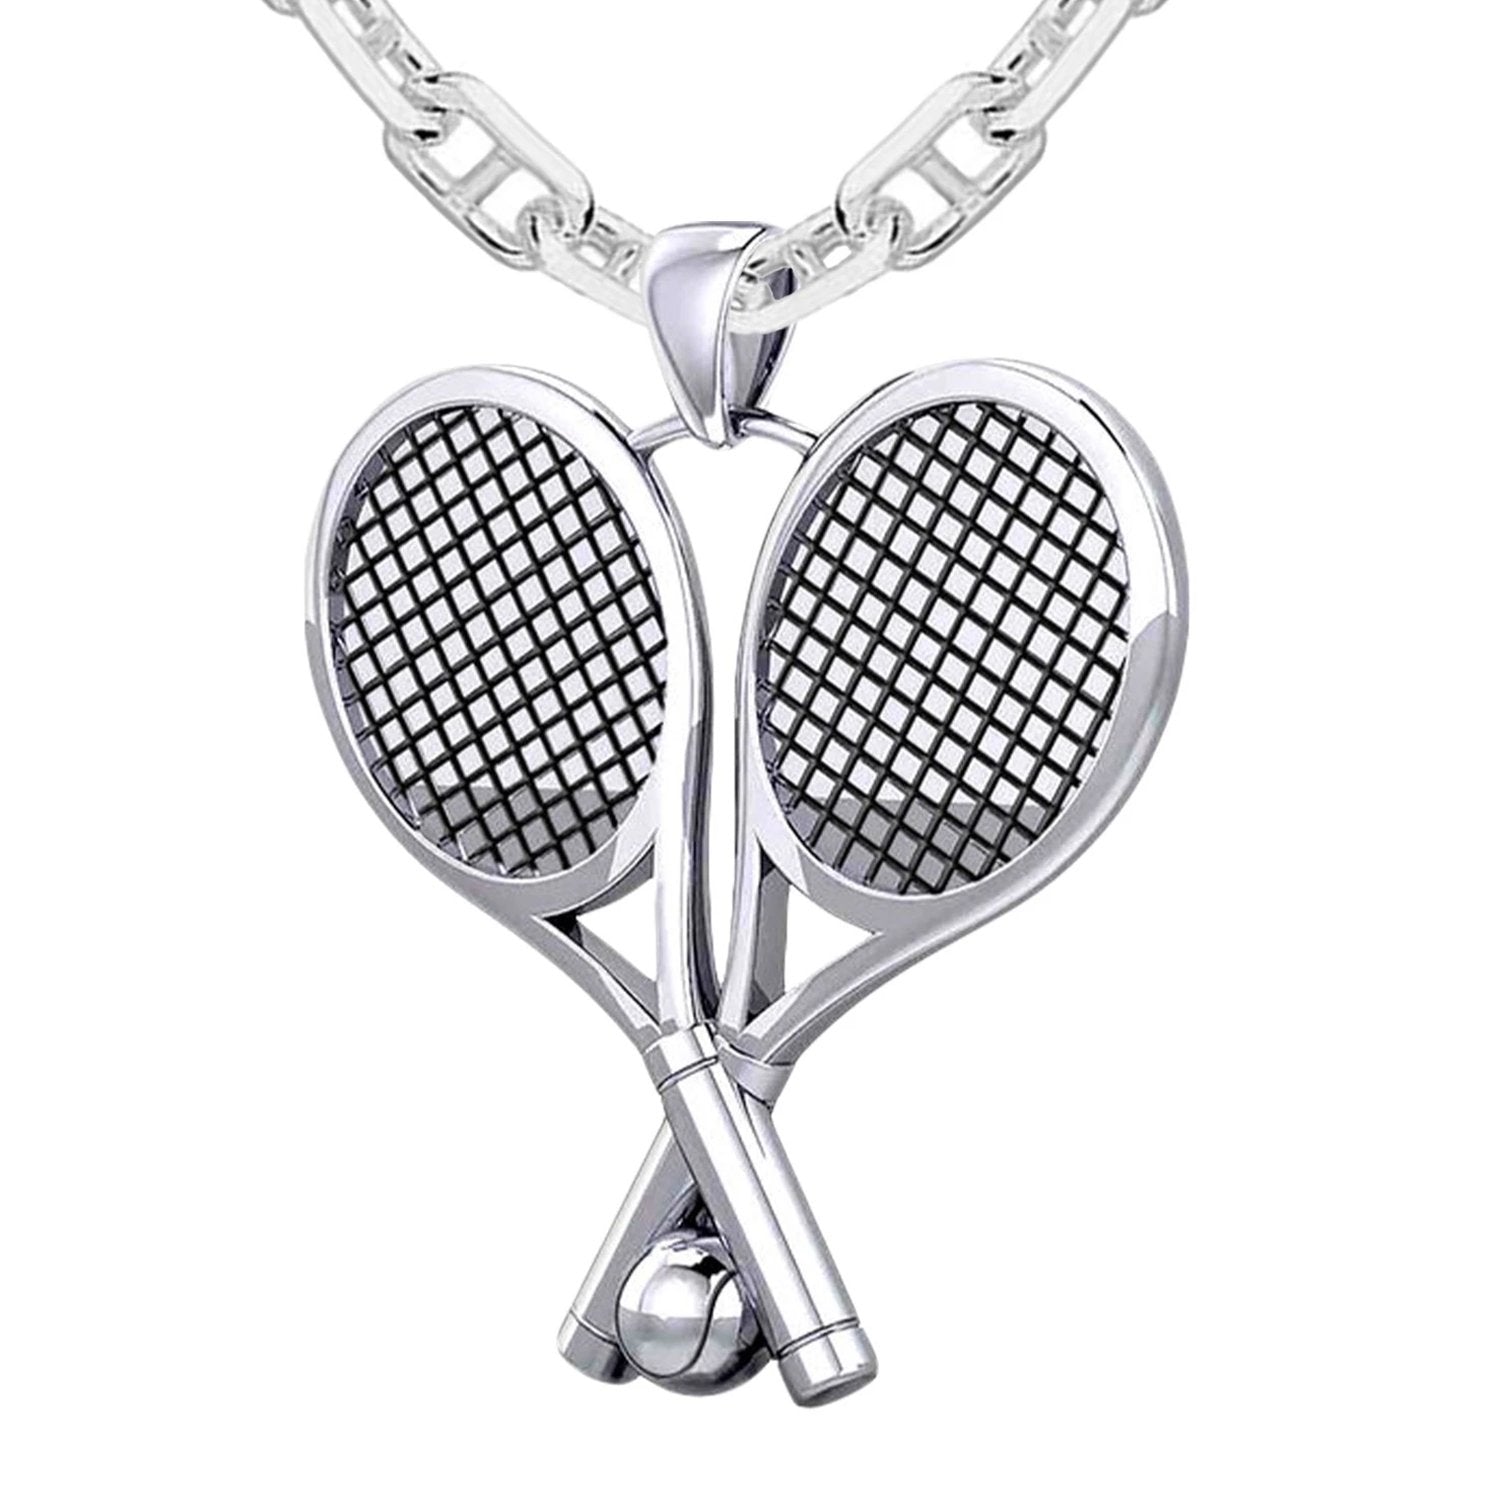 Large 925 Sterling Silver 3D Double Tennis Racket & Ball Pendant Necklace, 39mm - US Jewels